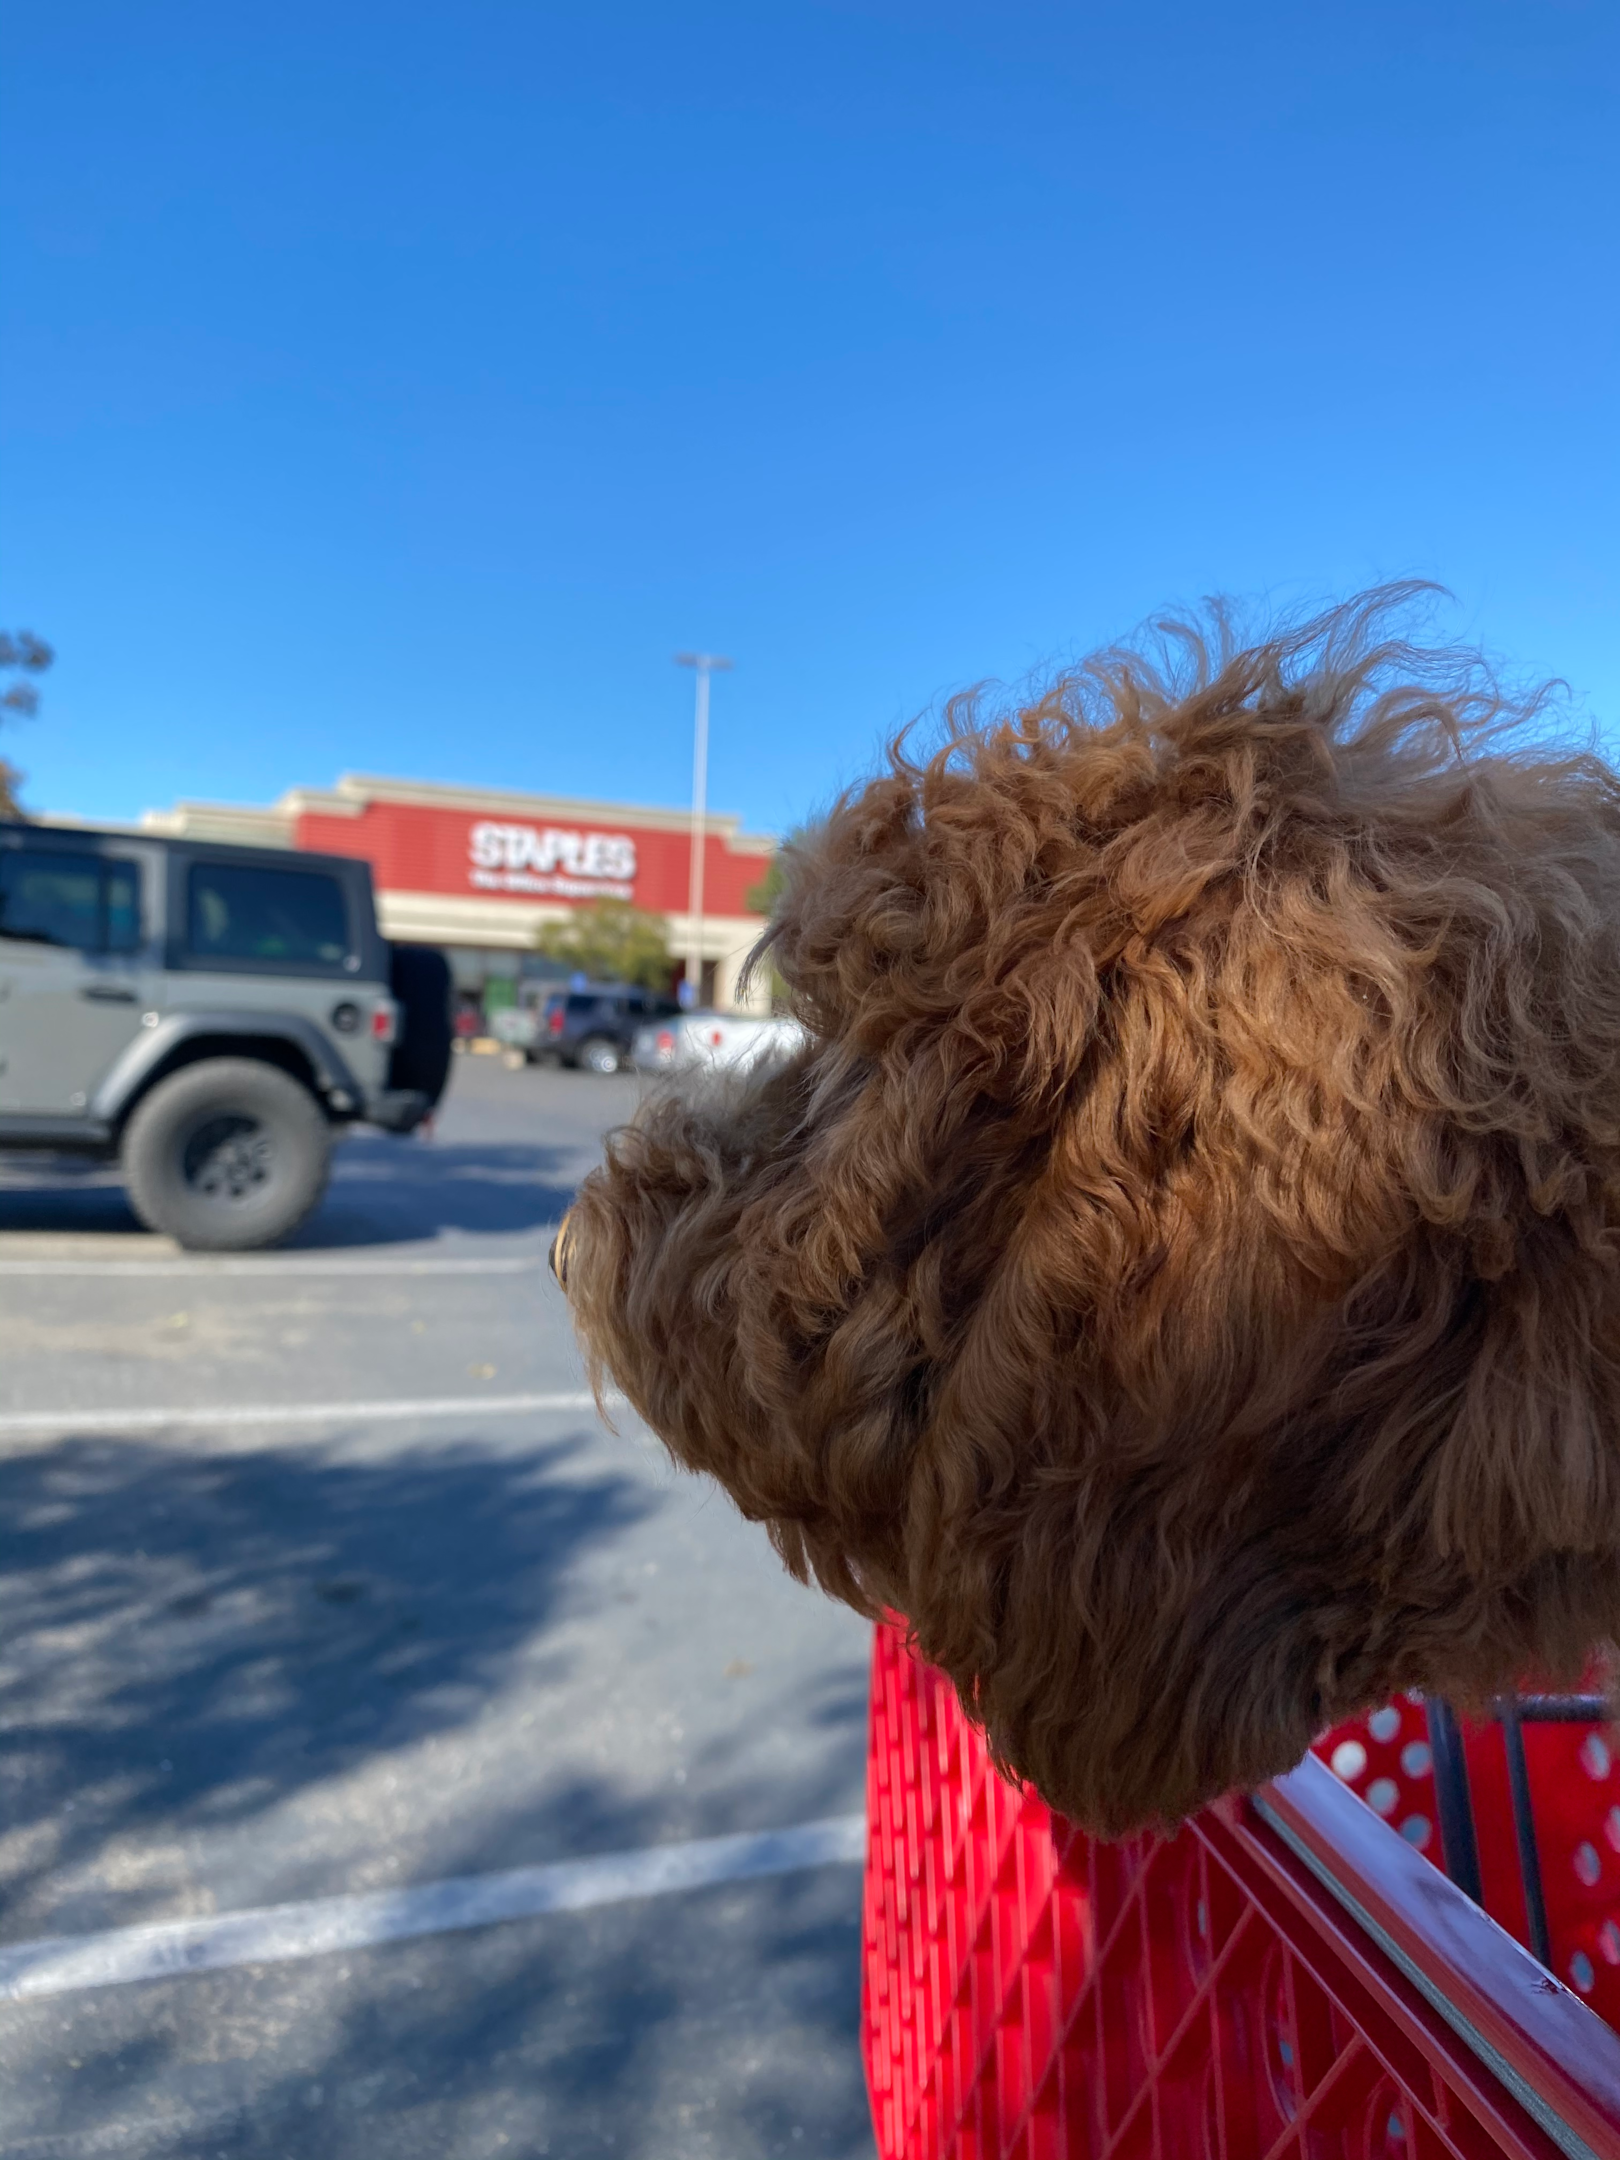 Image of a cute dog in a cart in front of a Staples store. 